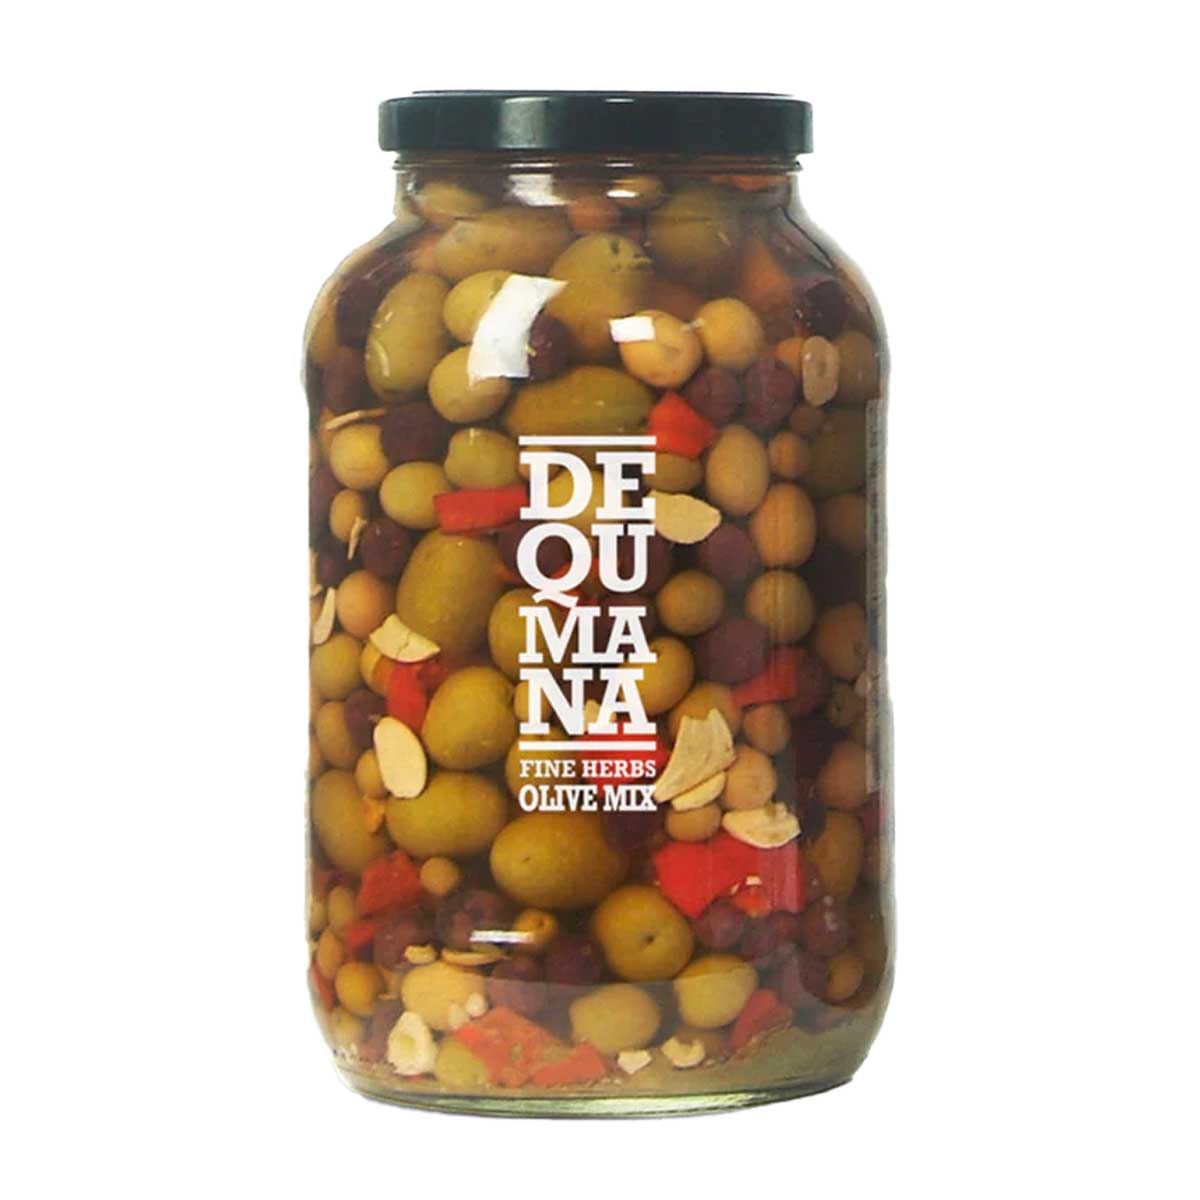 Dequmana Mixed Olives with Herbs 7oz 8ct